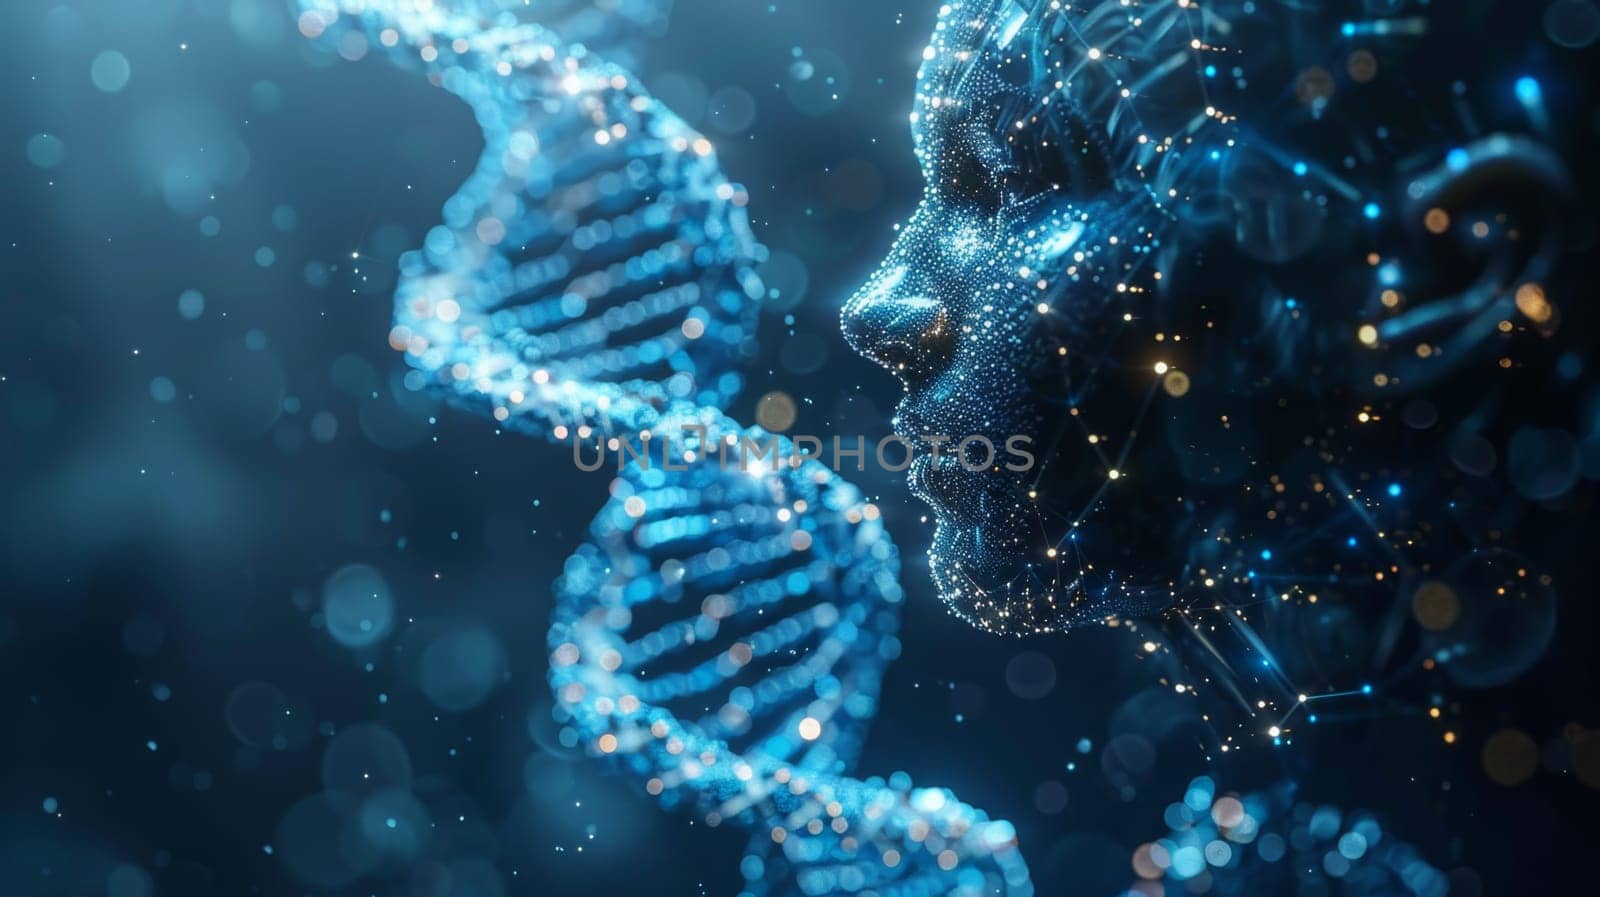 A spiral of a blue DNA double helix and a girl's face on a blue background. 3d illustration by Lobachad